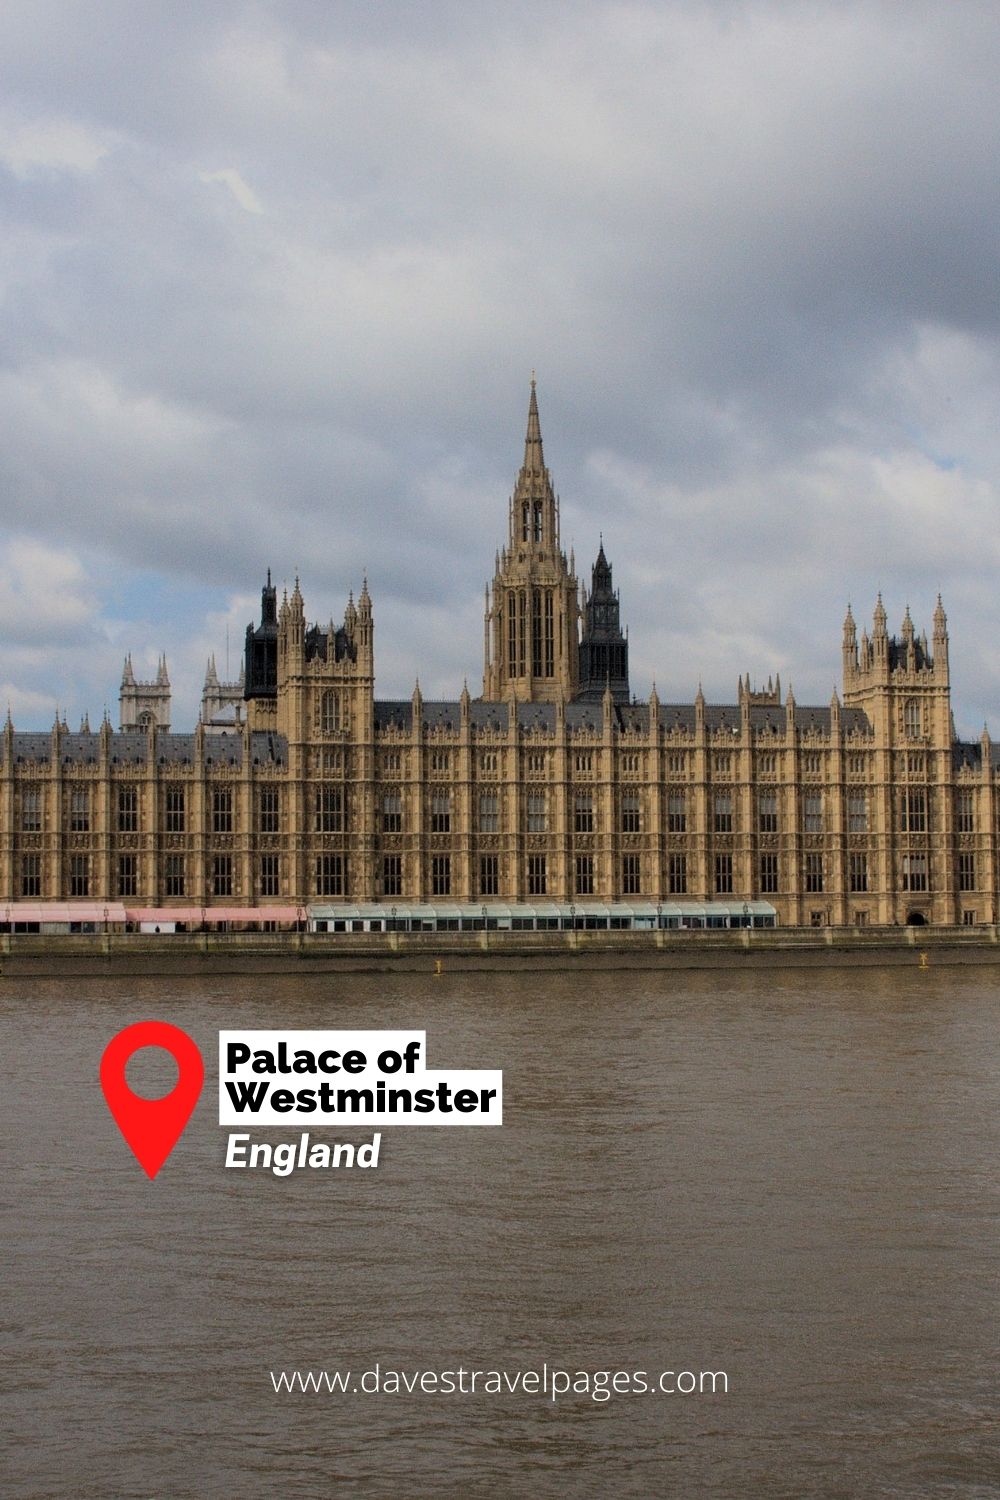 The Palace of Westminster is one of 10 famous landmarks in Europe